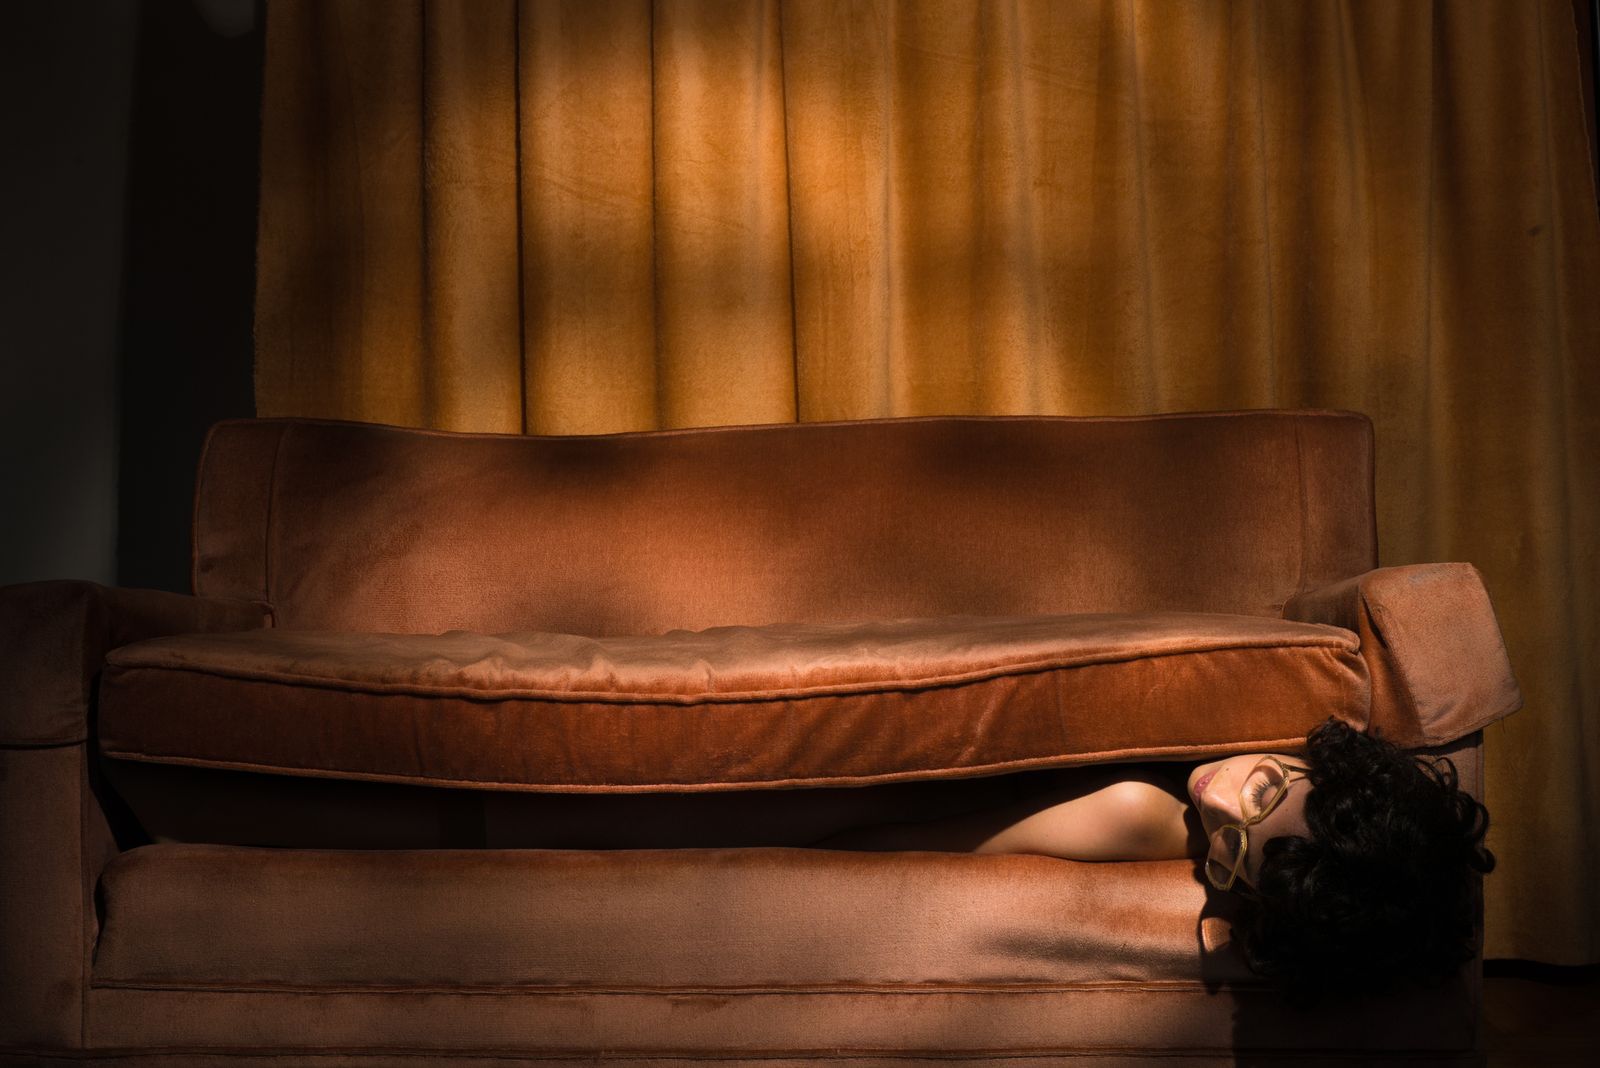 © Tania Franco Klein - The Couch (Self-portrait)